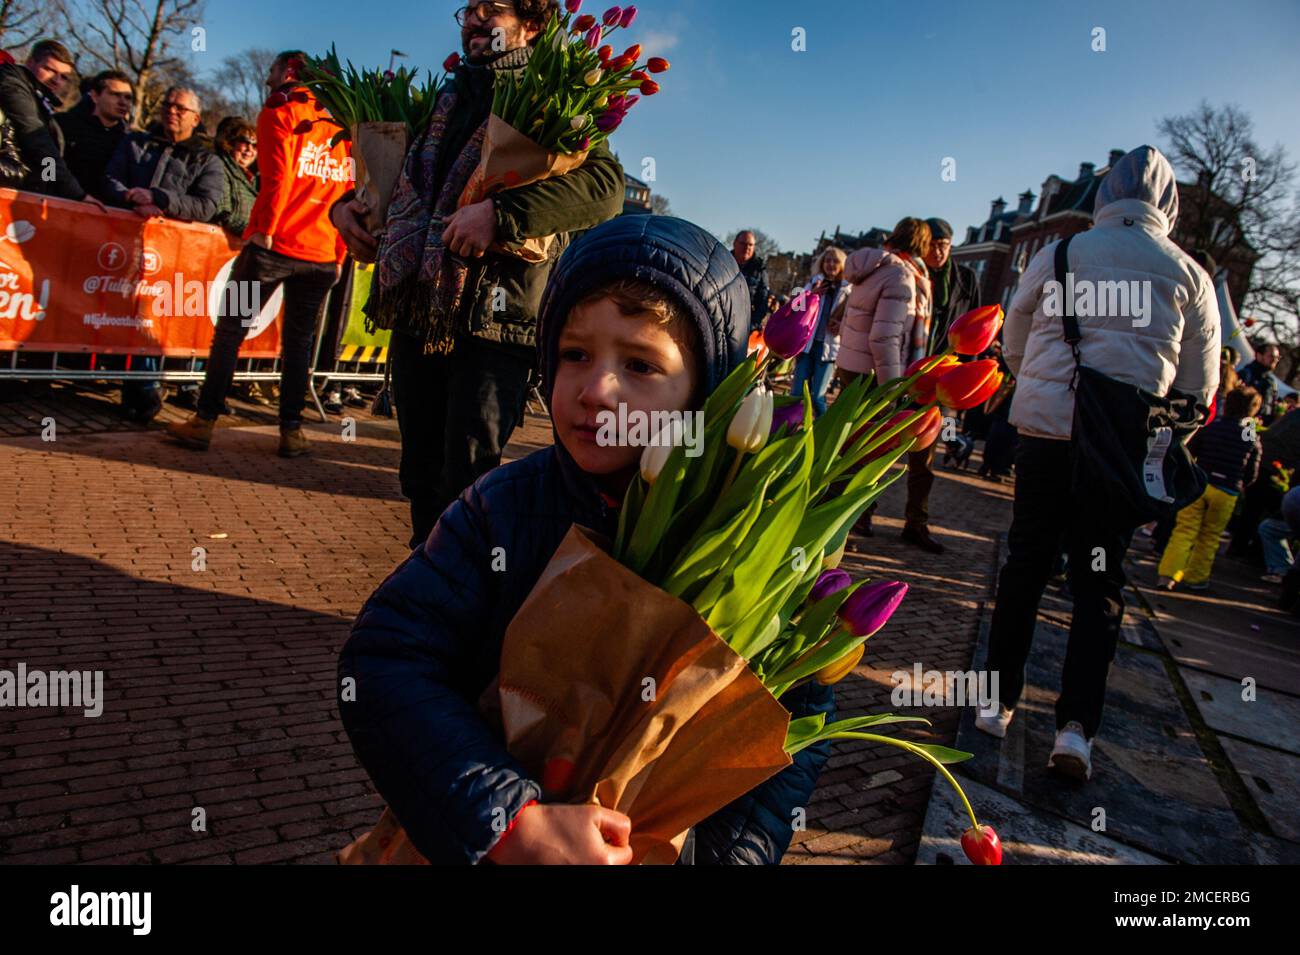 A little boy seen carrying a paper bag full of tulips. Each year on the 3rd Saturday of January, the National Tulip Day is celebrated in Amsterdam. Dutch tulip growers built a huge picking garden with more than 200,000 colorful tulips at the Museumplein in Amsterdam. Visitors are allowed to pick tulips for free. The event was opened by Olympic skating champion, Irene Schouten. Prior to the opening, she christened a new tulip: Tulipa 'Dutch Pearl' as a reference to the world - famous painting 'The girl with a pearl earring' by Johannes Vermeer. Stock Photo